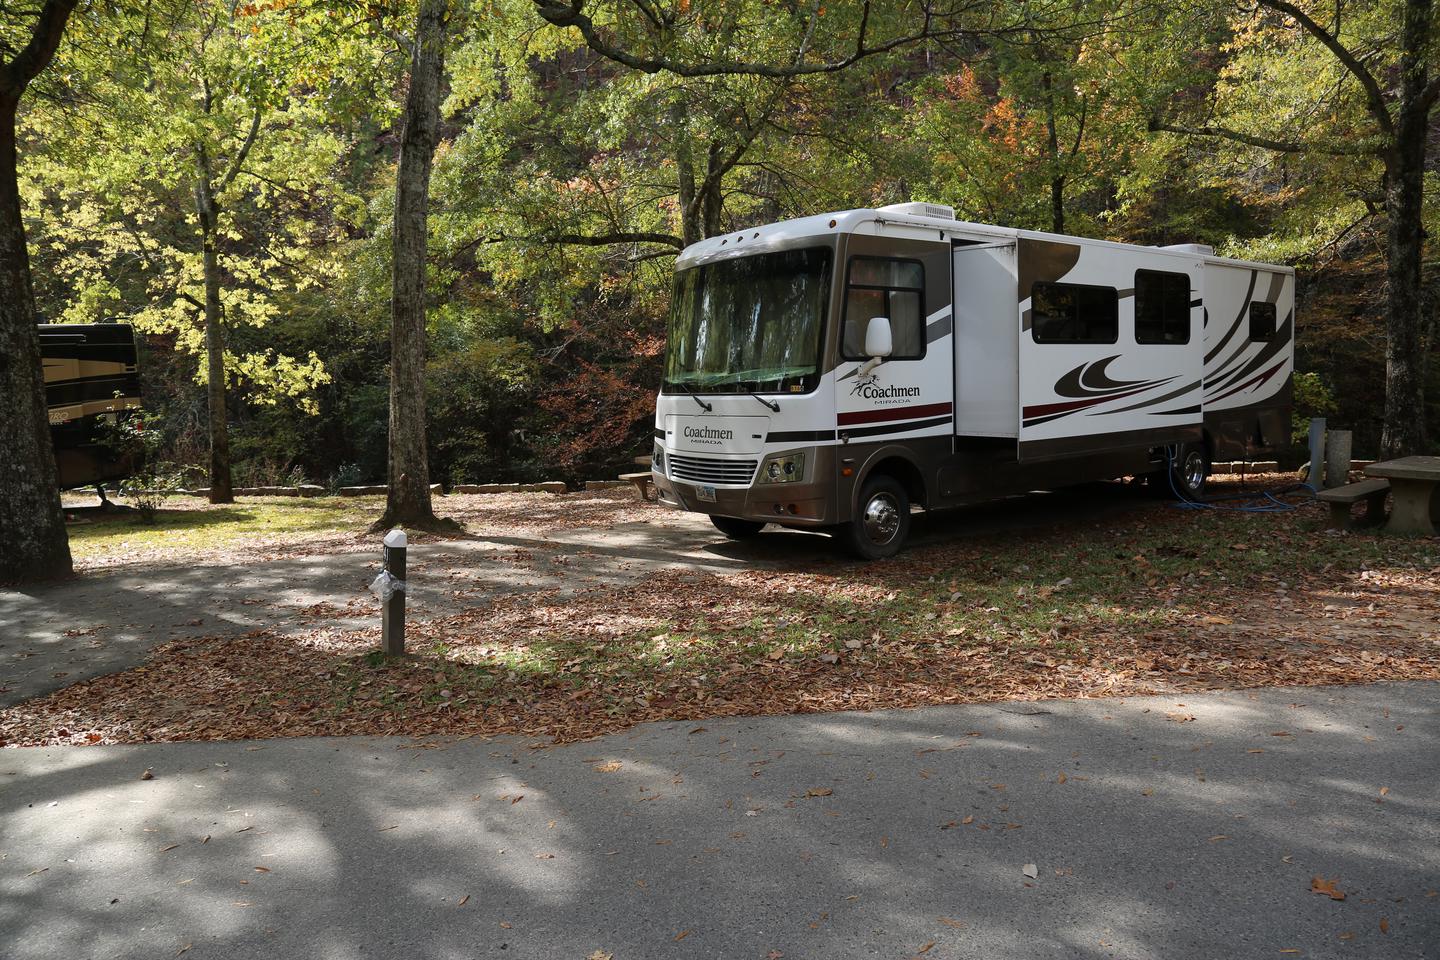 Large RV with side popped out on paved site surrounded by trees, grass and fallen leavesCampsite 41